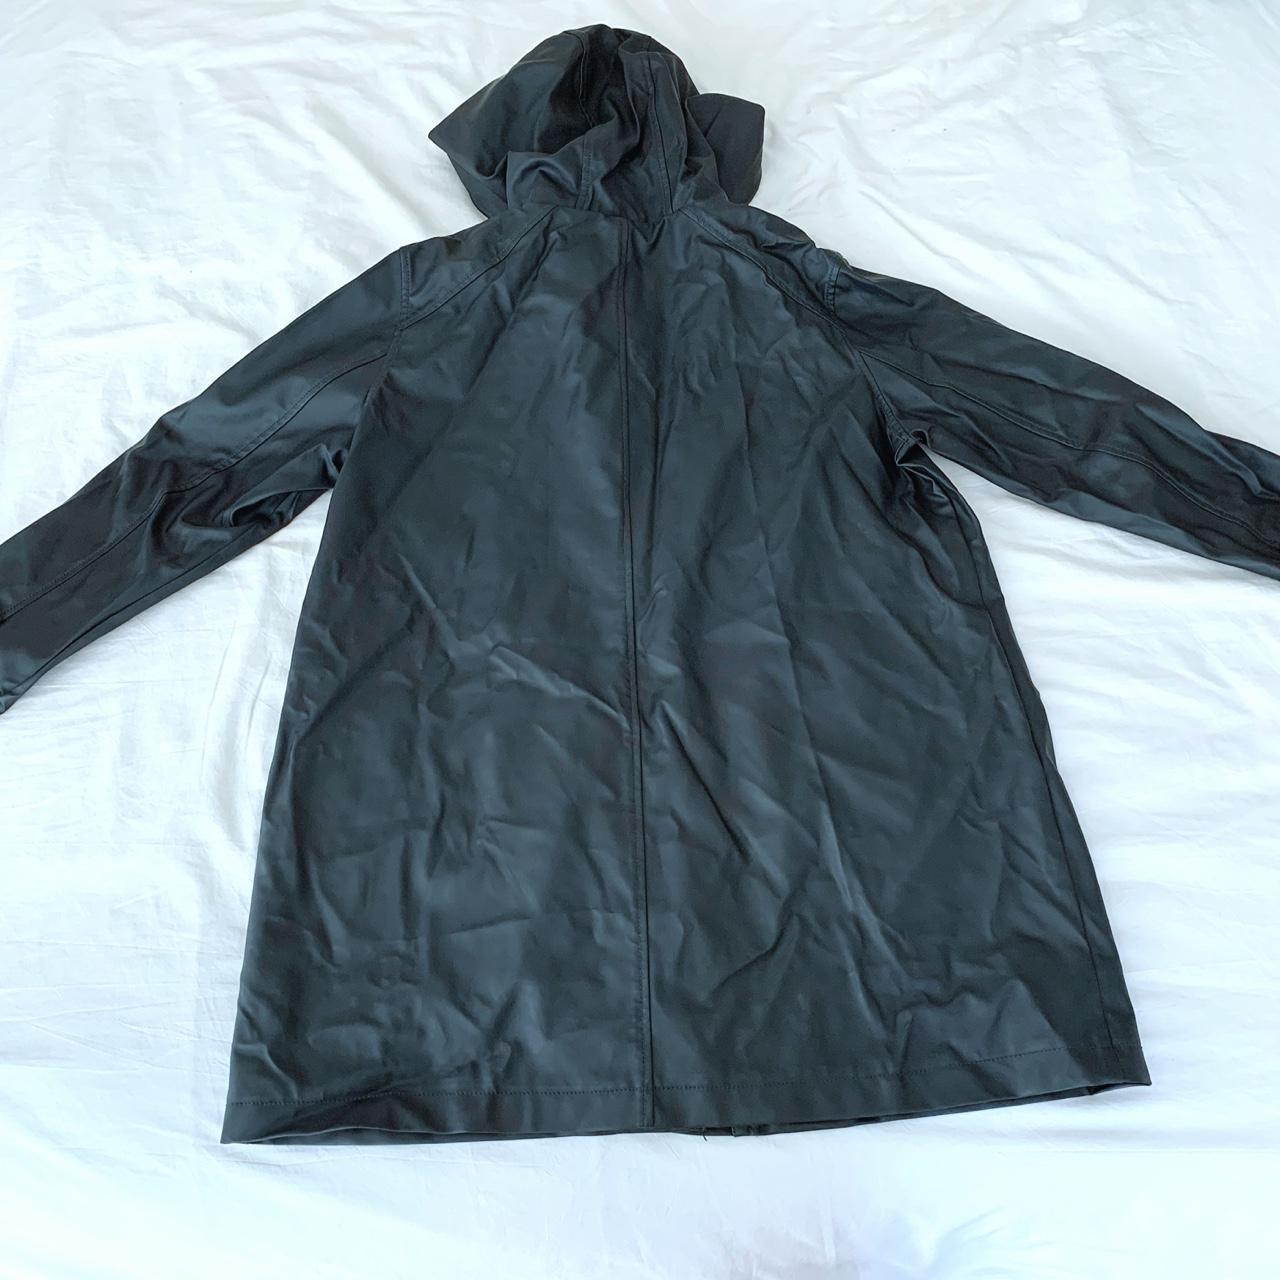 UO RUBBER RAIN JACKET Love this jacket and brought... - Depop